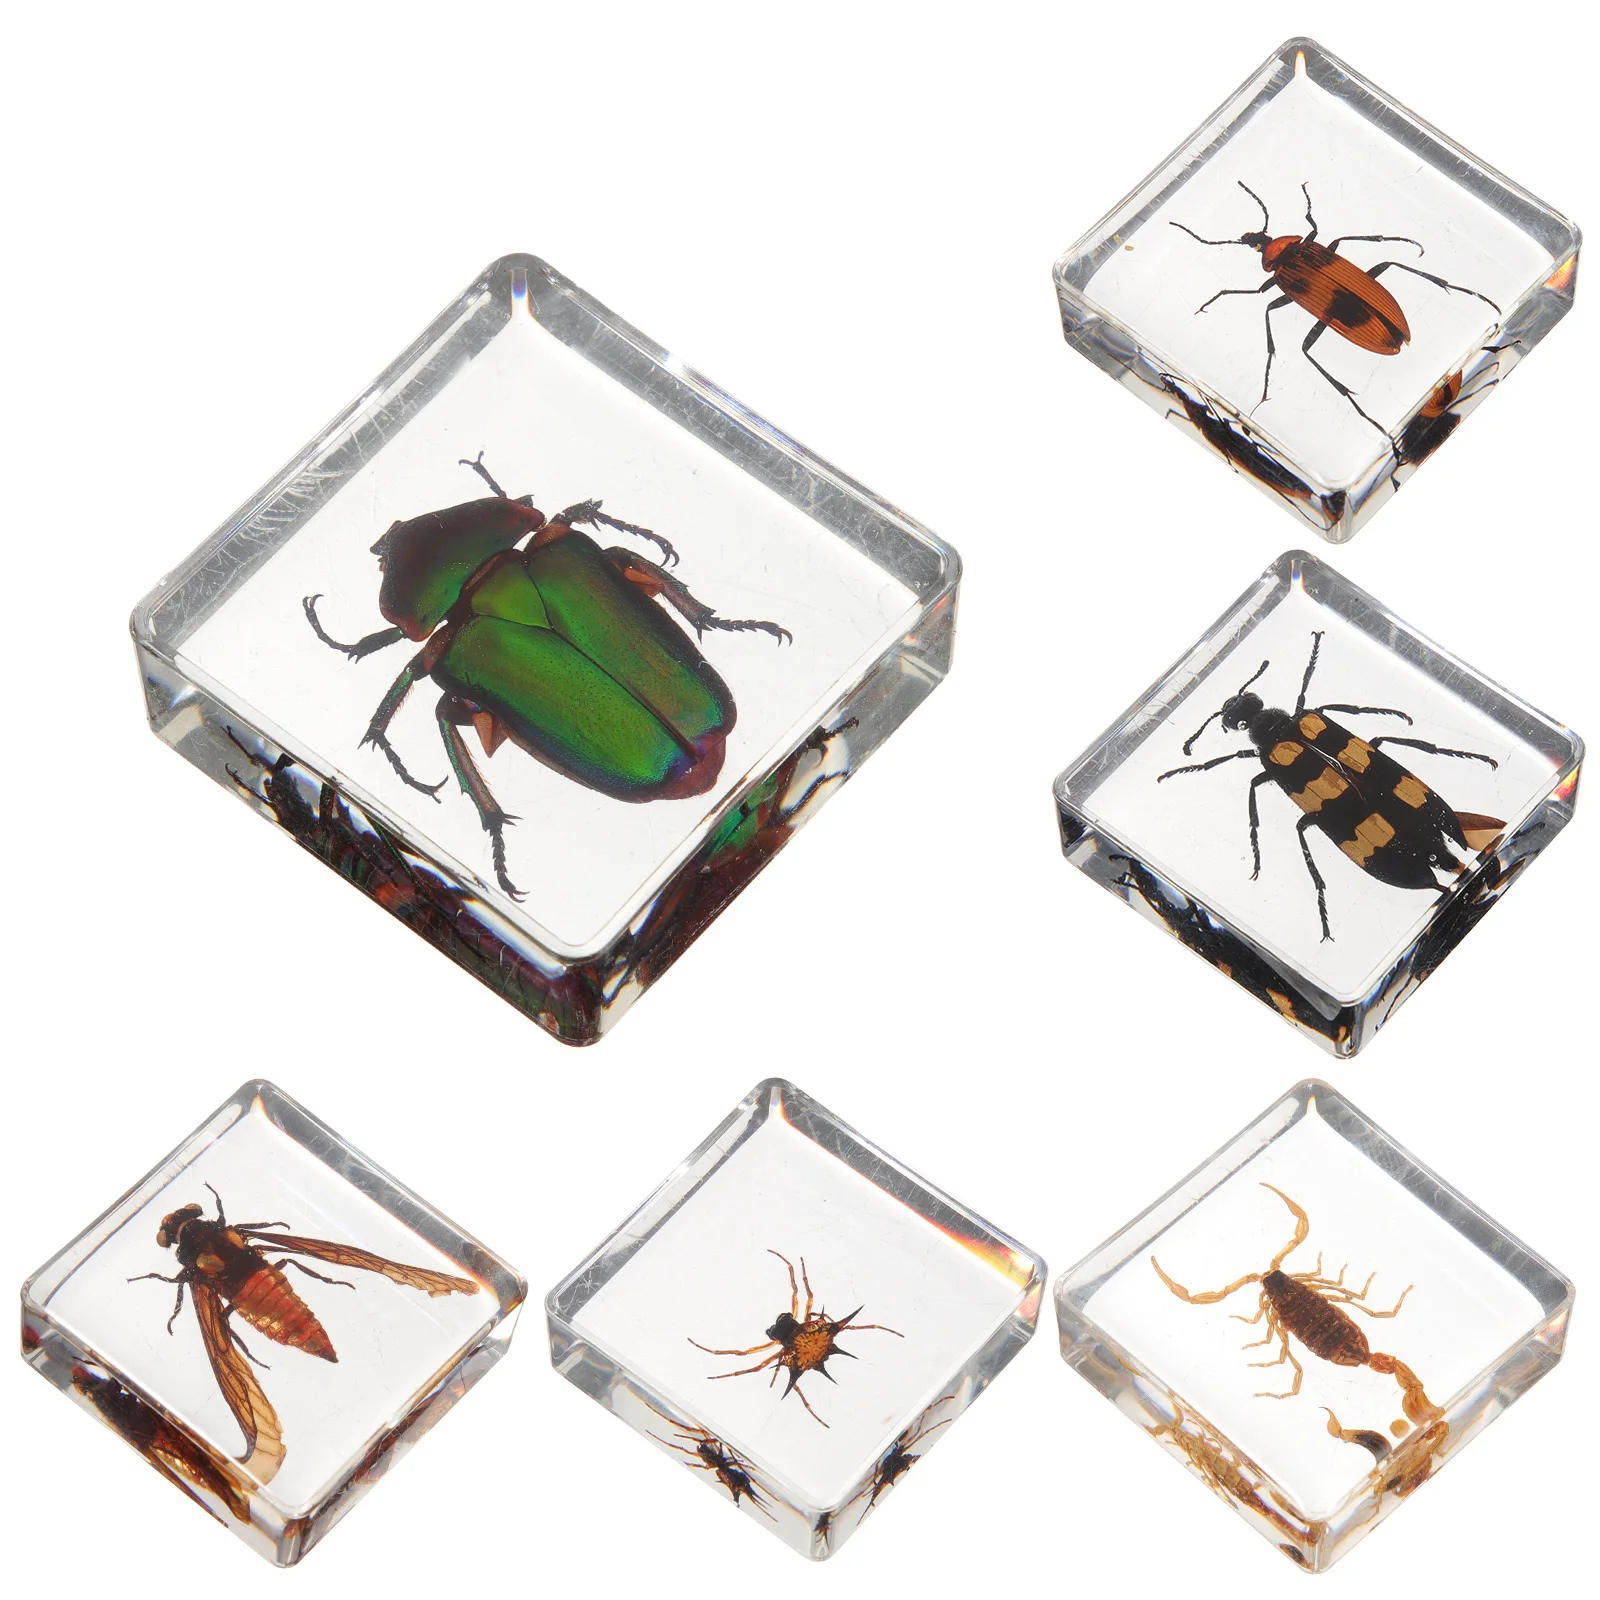 

6 Pcs Insect Specimen House Decorations Home Insects Shaped Resin Ornaments Desktop Small Student Delicate